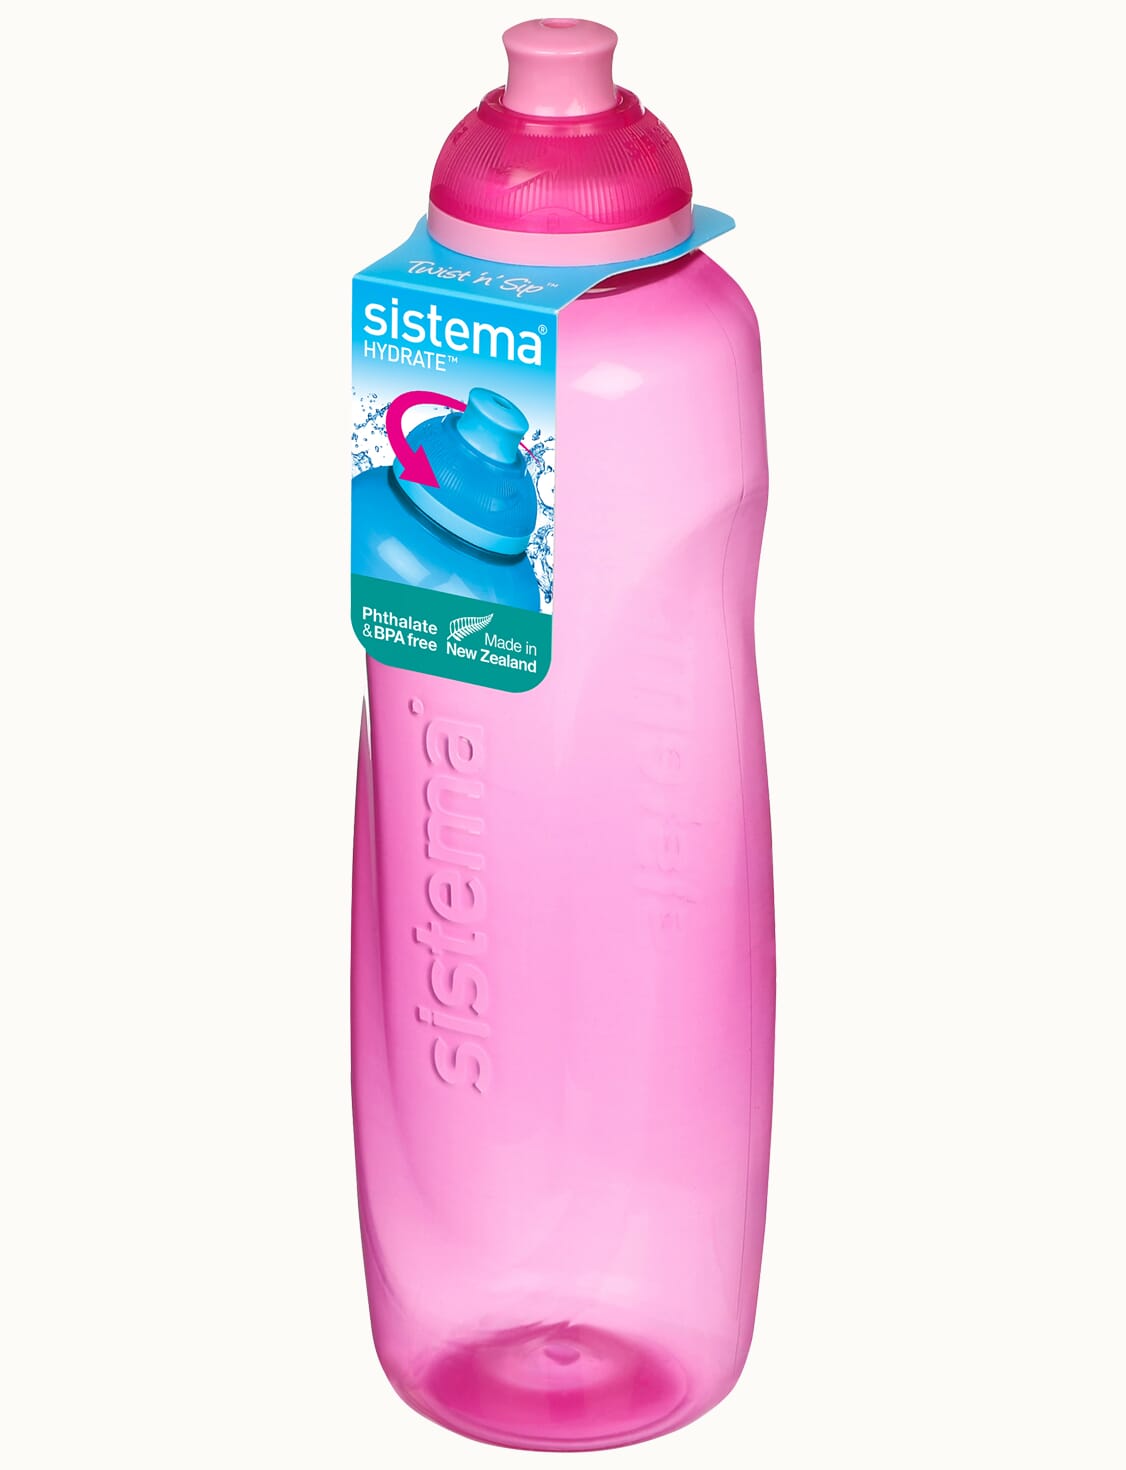 https://stergita.sirv.com/sistema/catalog/product/7/3/730_600ml_helix_angle_label_pink.png?canvas.color=fcfbf8